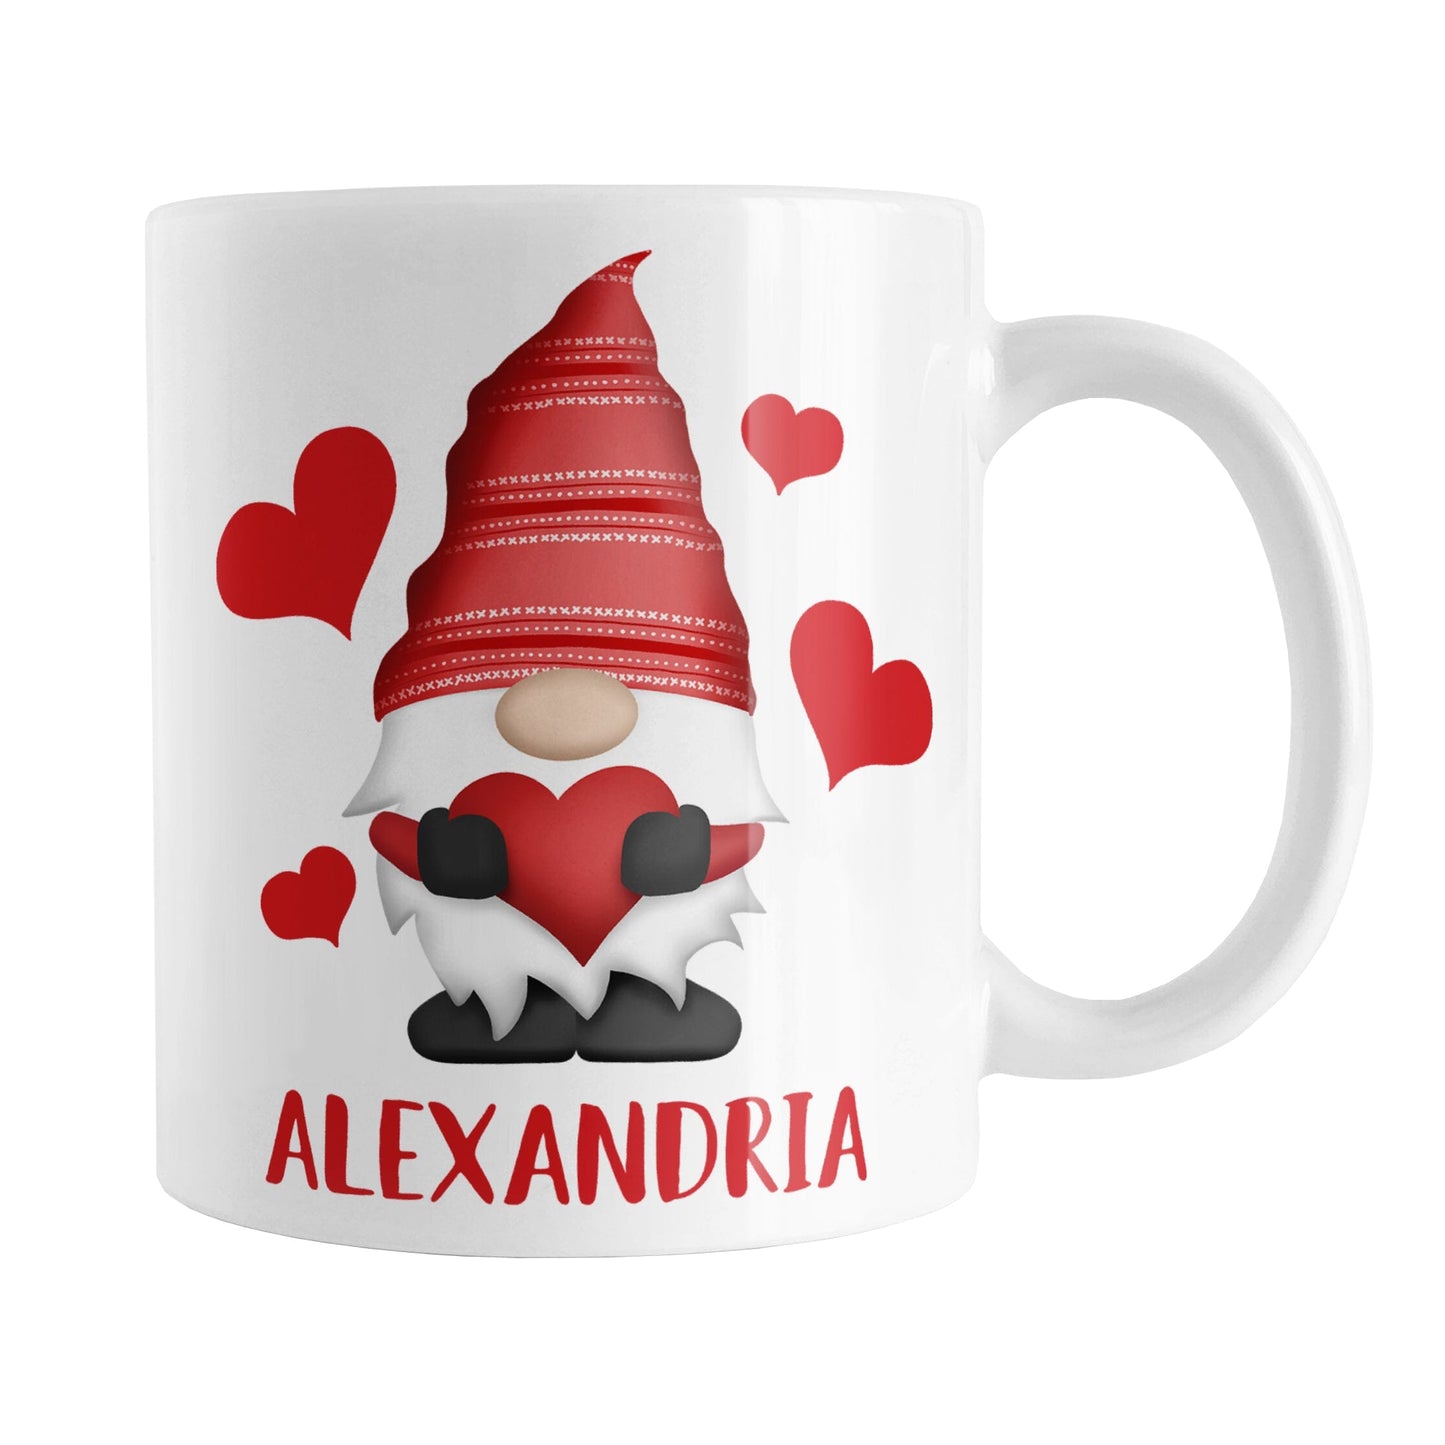 Personalized Red Heart Gnome Mug (11oz) at Amy's Coffee Mugs. A ceramic coffee mug designed with an illustration of an adorable gnome with a red pointed hat, holding a big red heart, with bold red hearts around it. Below the gnome is your personalized name custom printed in a cute red font. This charming gnome and personalized name are printed on both sides of the mug.